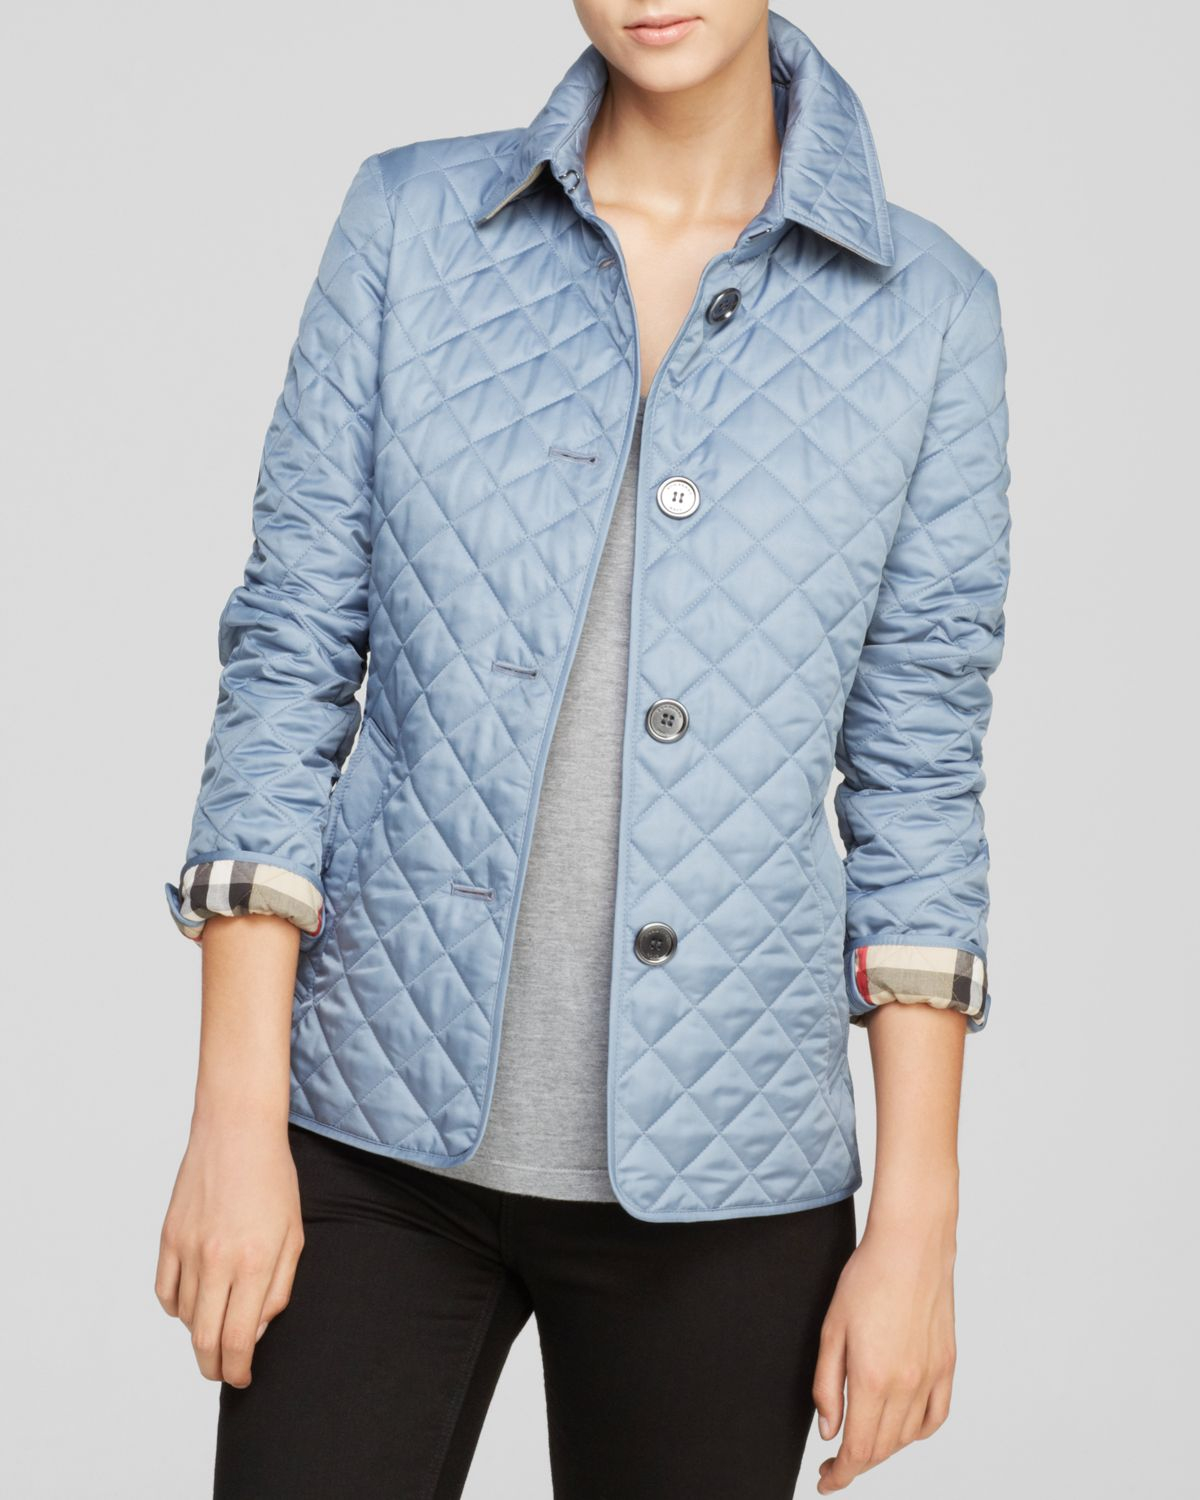 Burberry Brit Diamond Quilted Jacket in Slate Blue (Blue) | Lyst